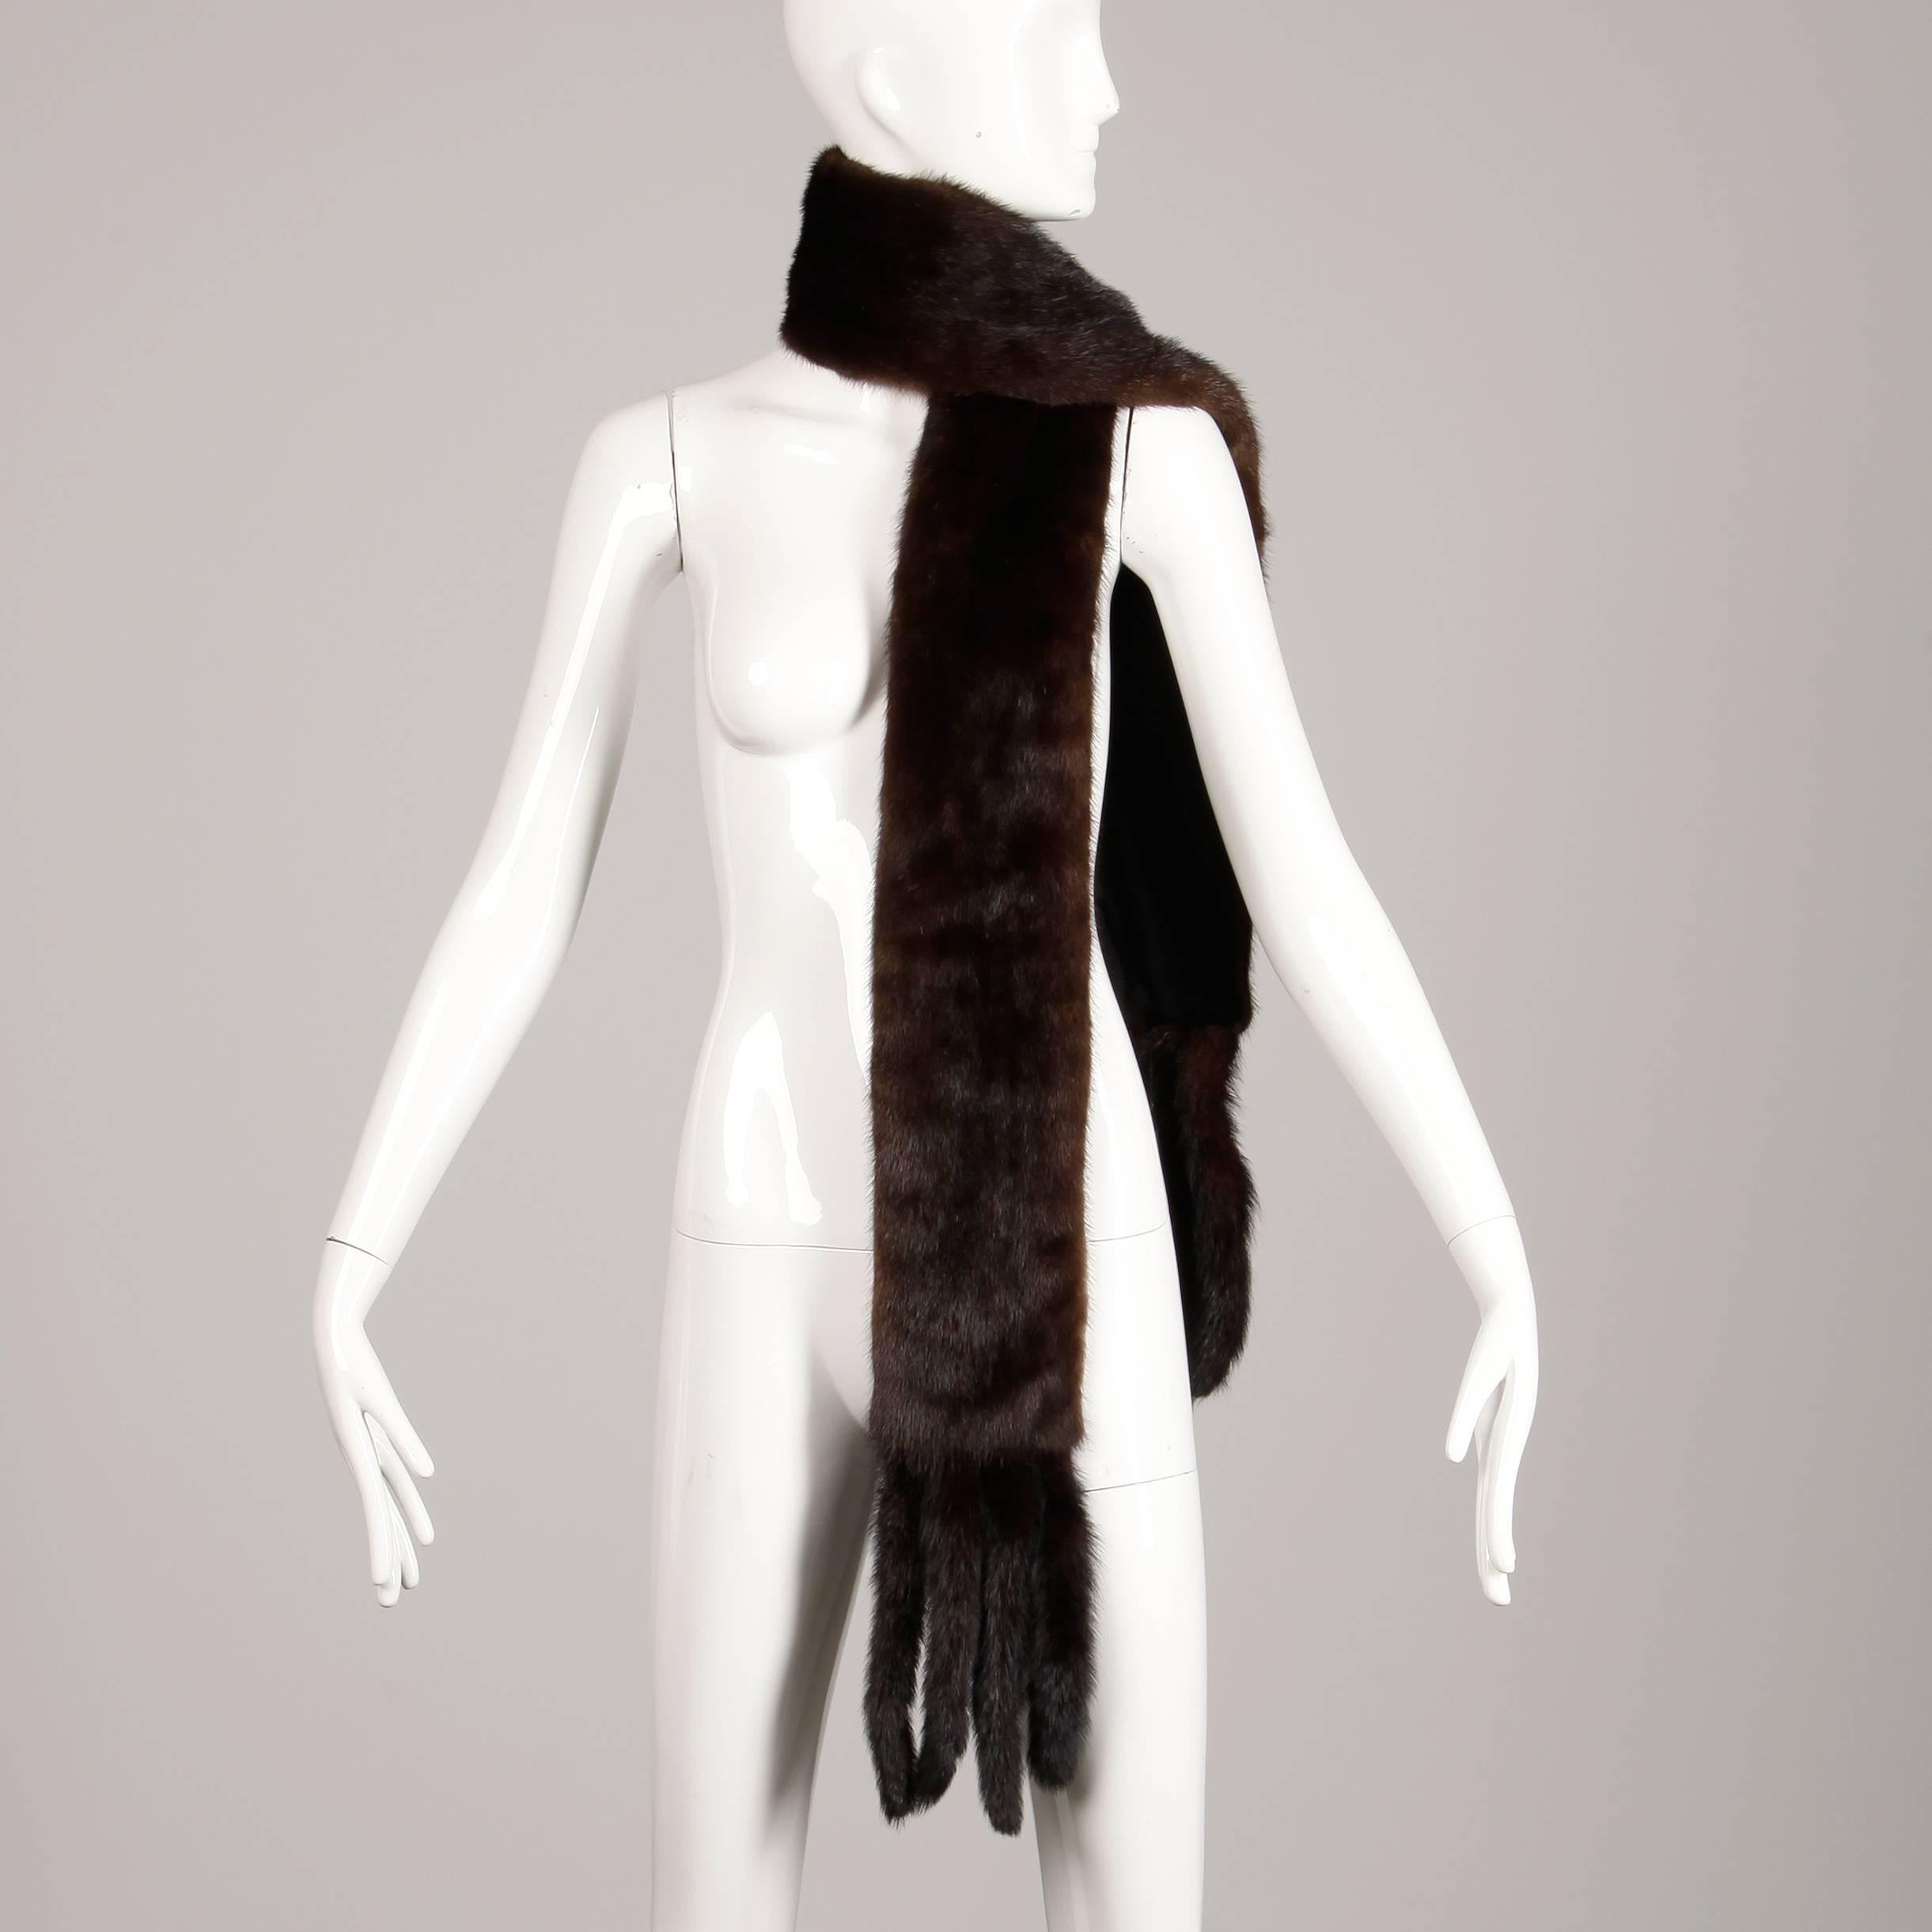 Gorgeous vintage mahogany mink fur scarf or fling with mink tail trim at both ends. Full pelts are in excellent condition and are nice a plush. Fully lined. The width measures 5